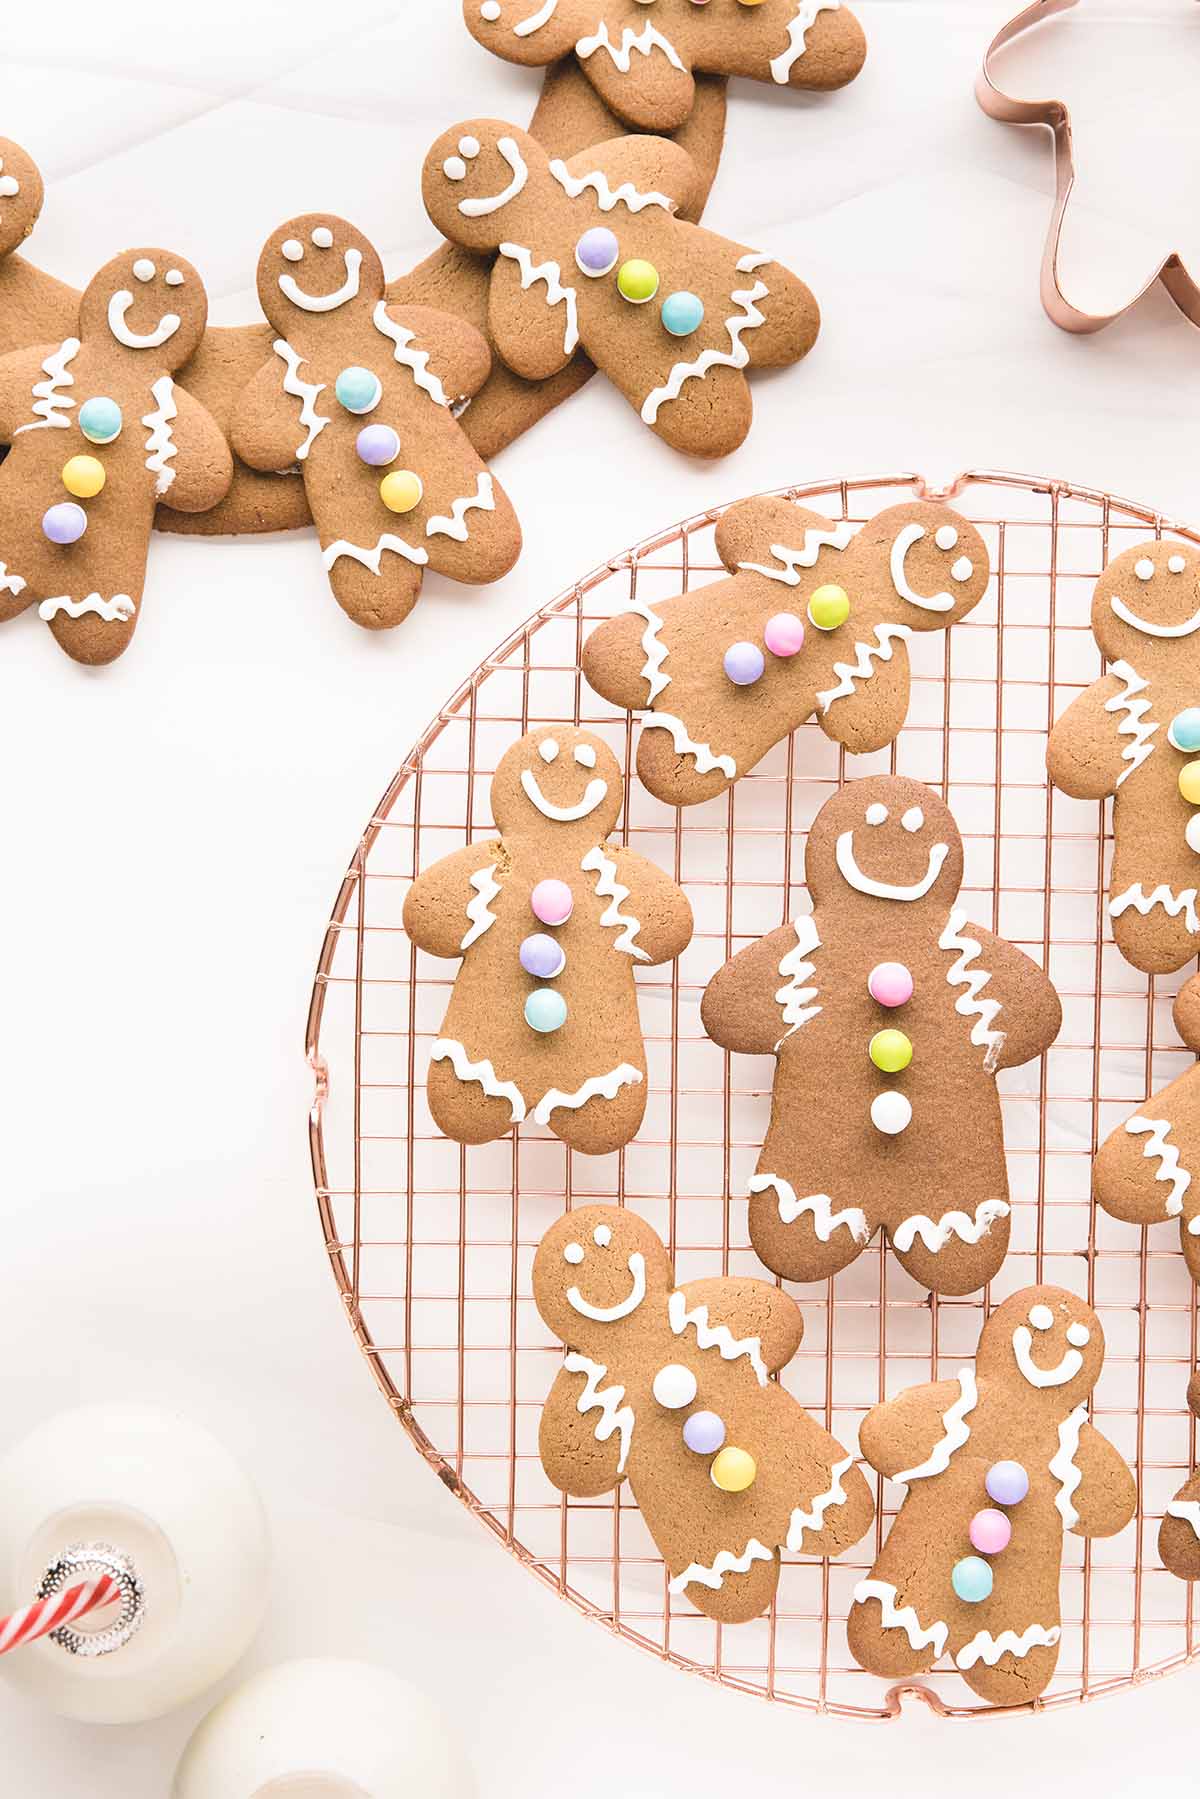 gingerbread wreath with icing